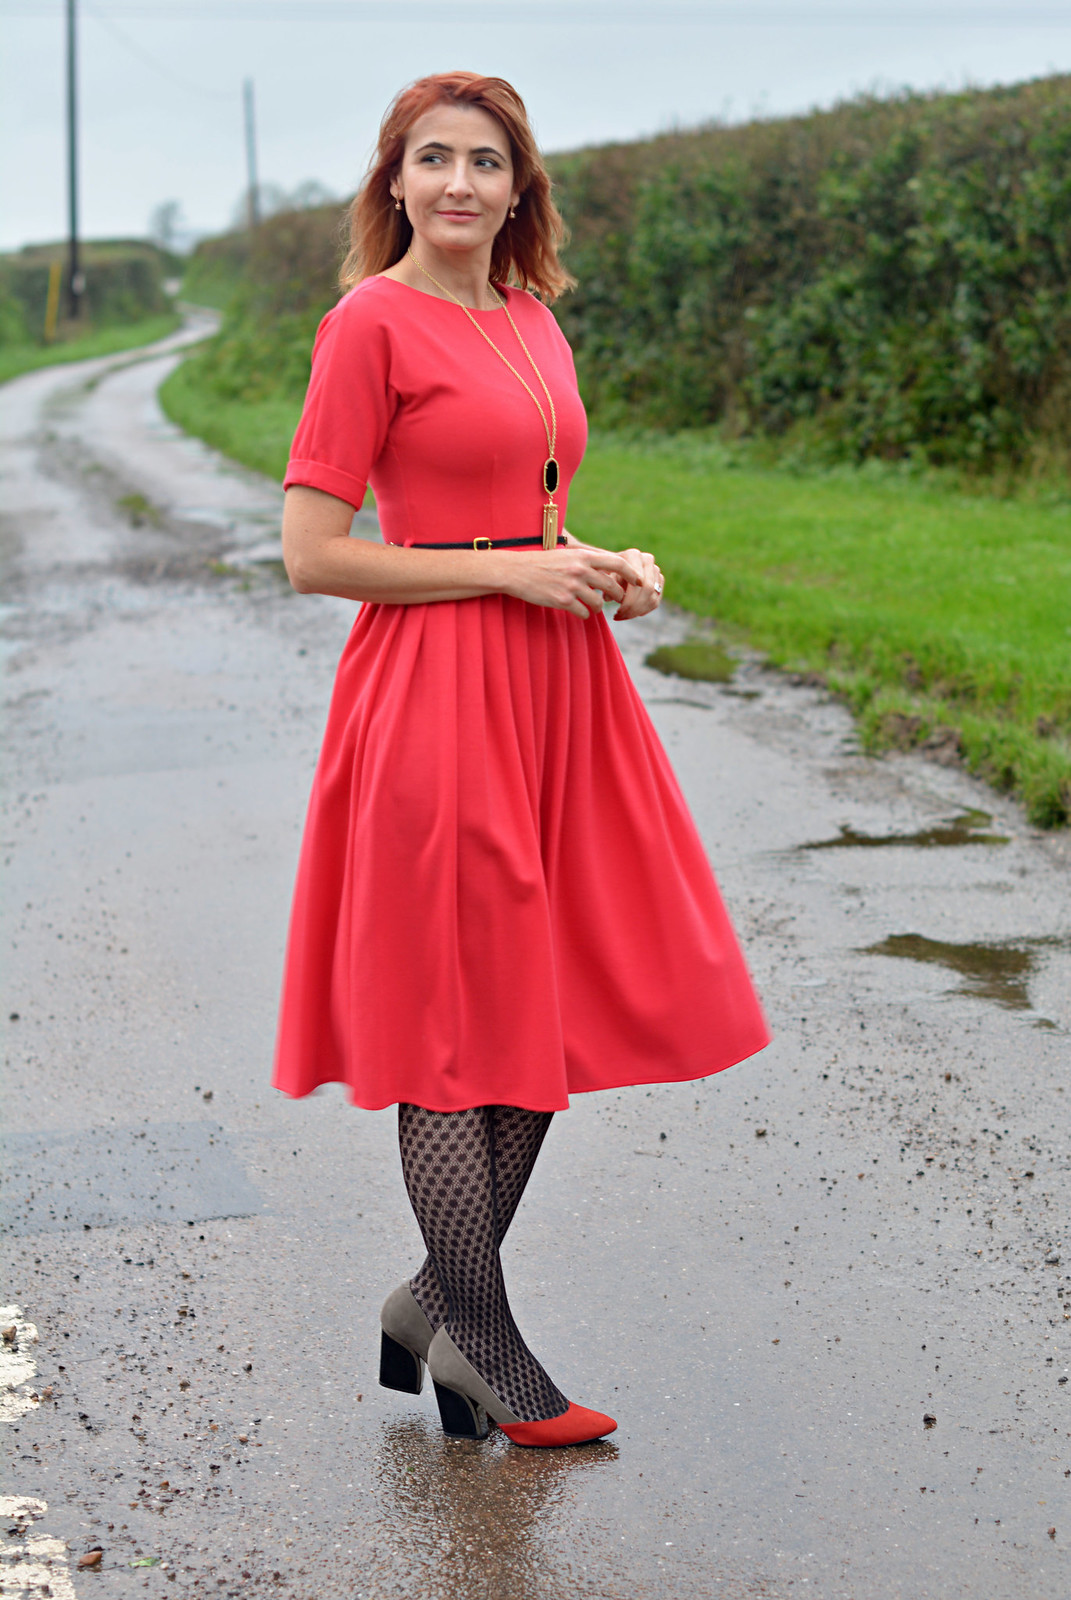 Red fit and flare dress, patterned tights